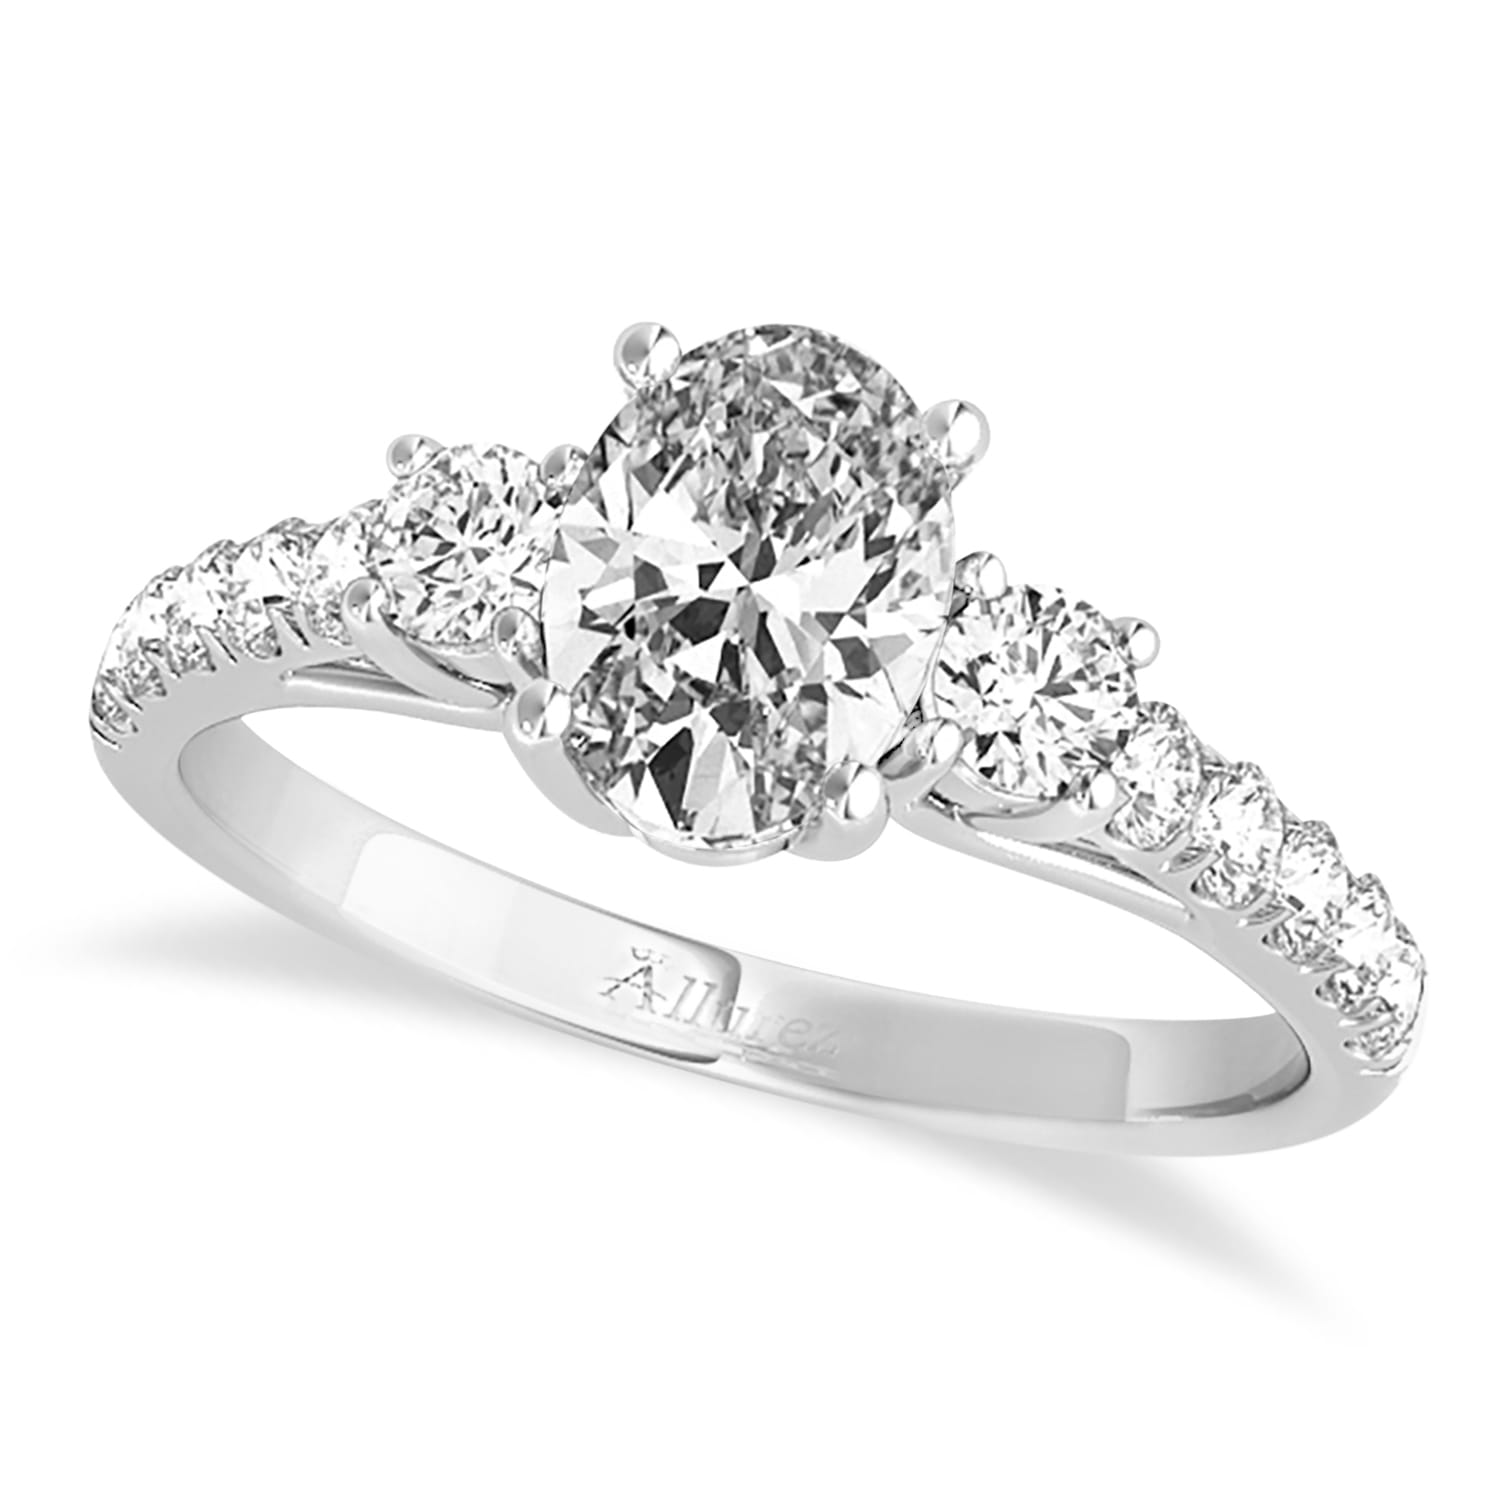 Oval Cut Diamond Engagement Ring 18k White Gold (1.40ct)